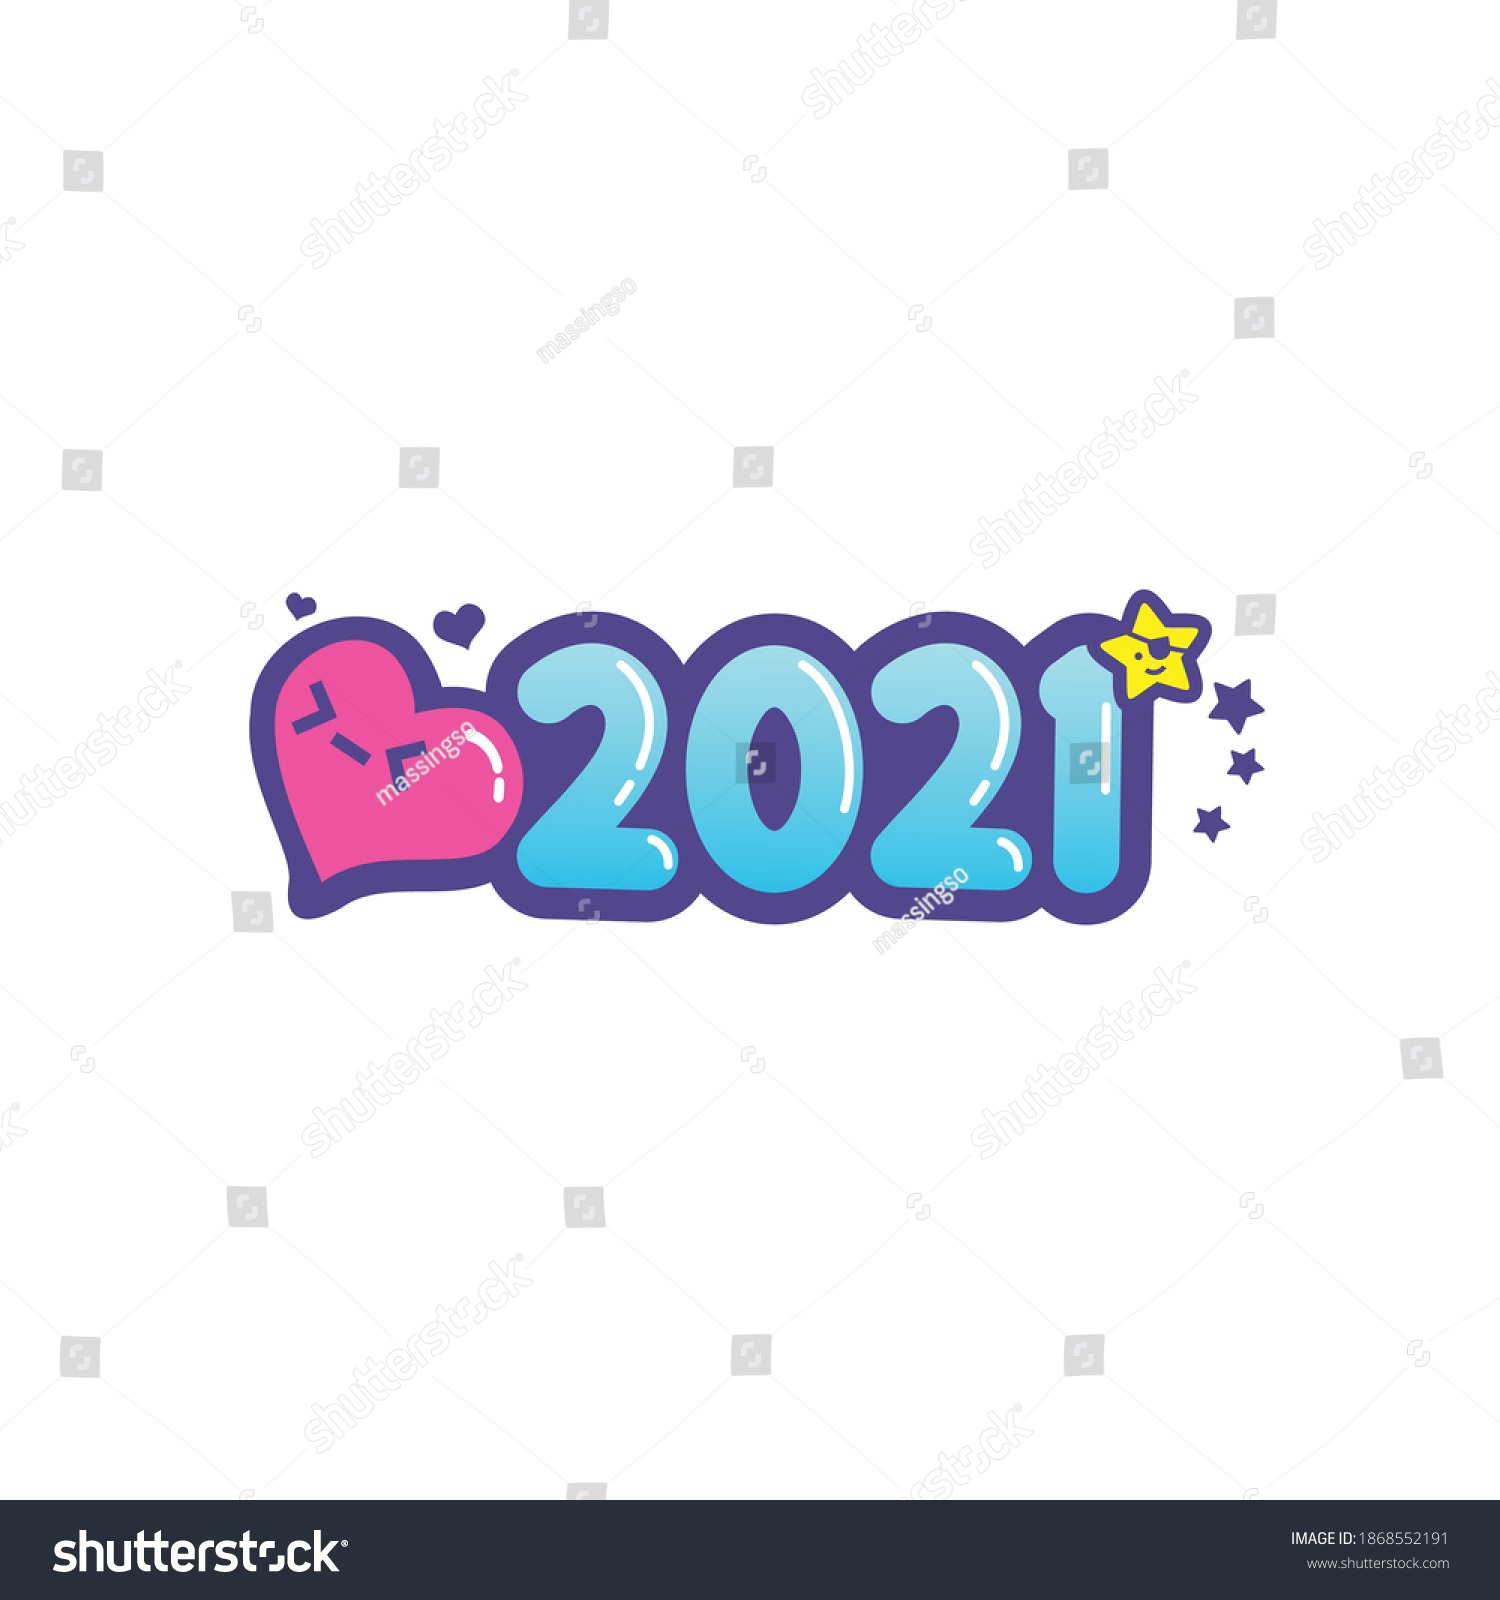 logo of 2021, logo of 2021 with candy concept #1868552191